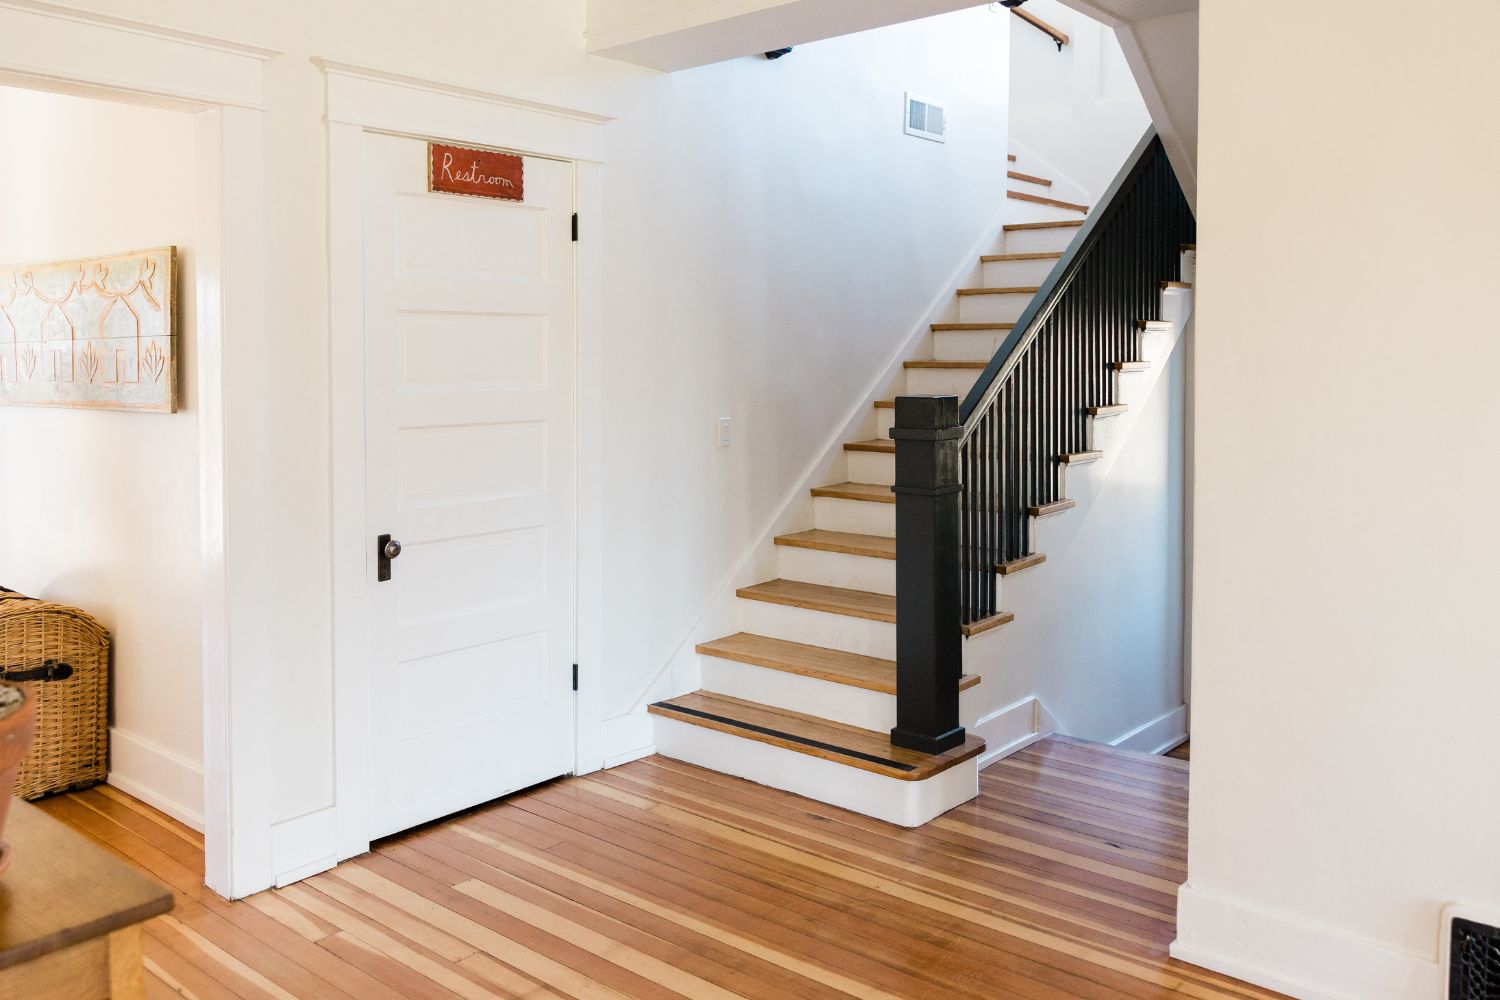 The main reasons why every home needs aluminum stairs